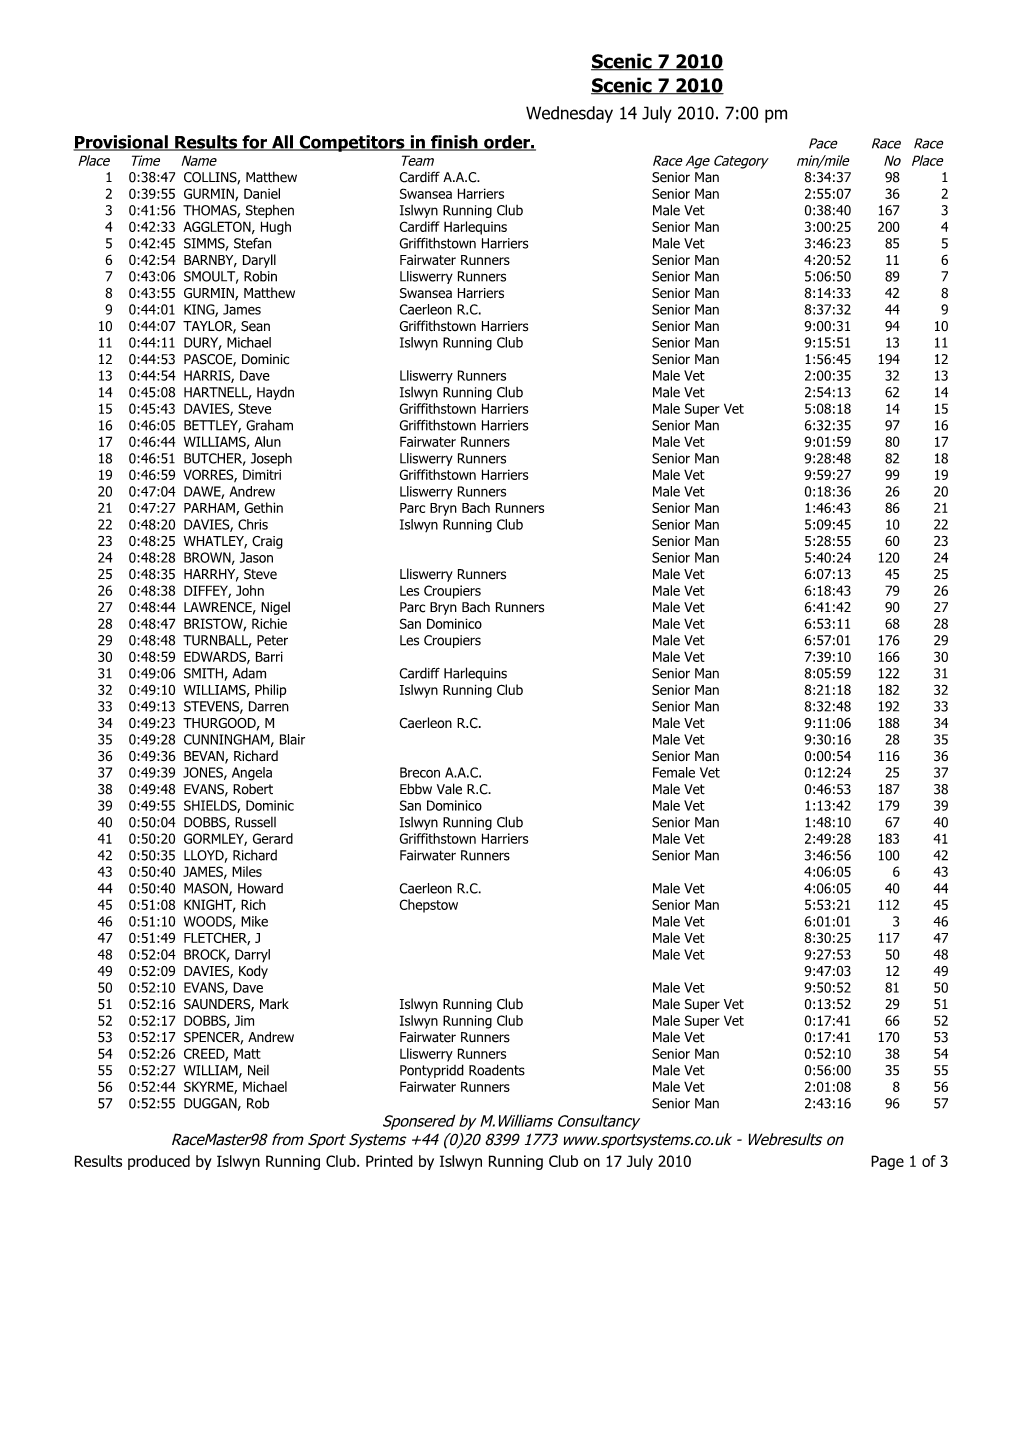 Provisional Results for All Competitors in Finish Order. Paceracerace